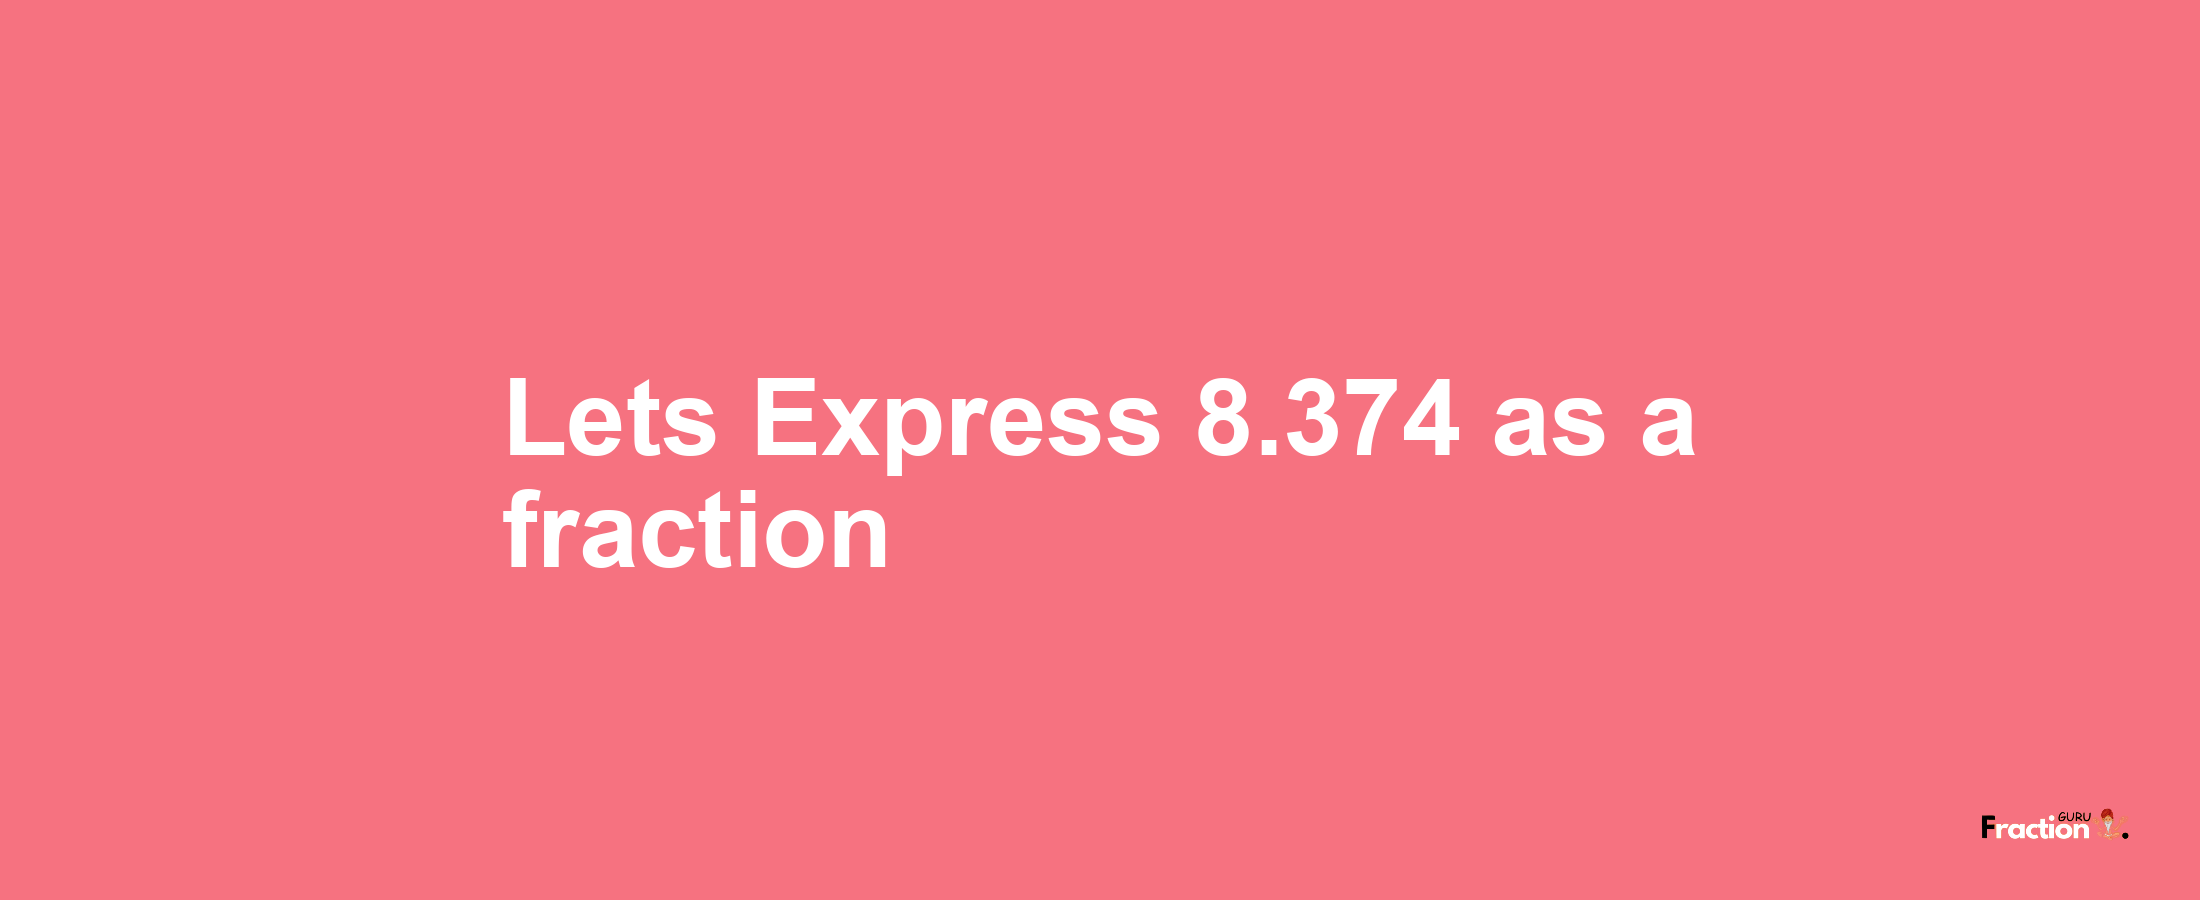 Lets Express 8.374 as afraction